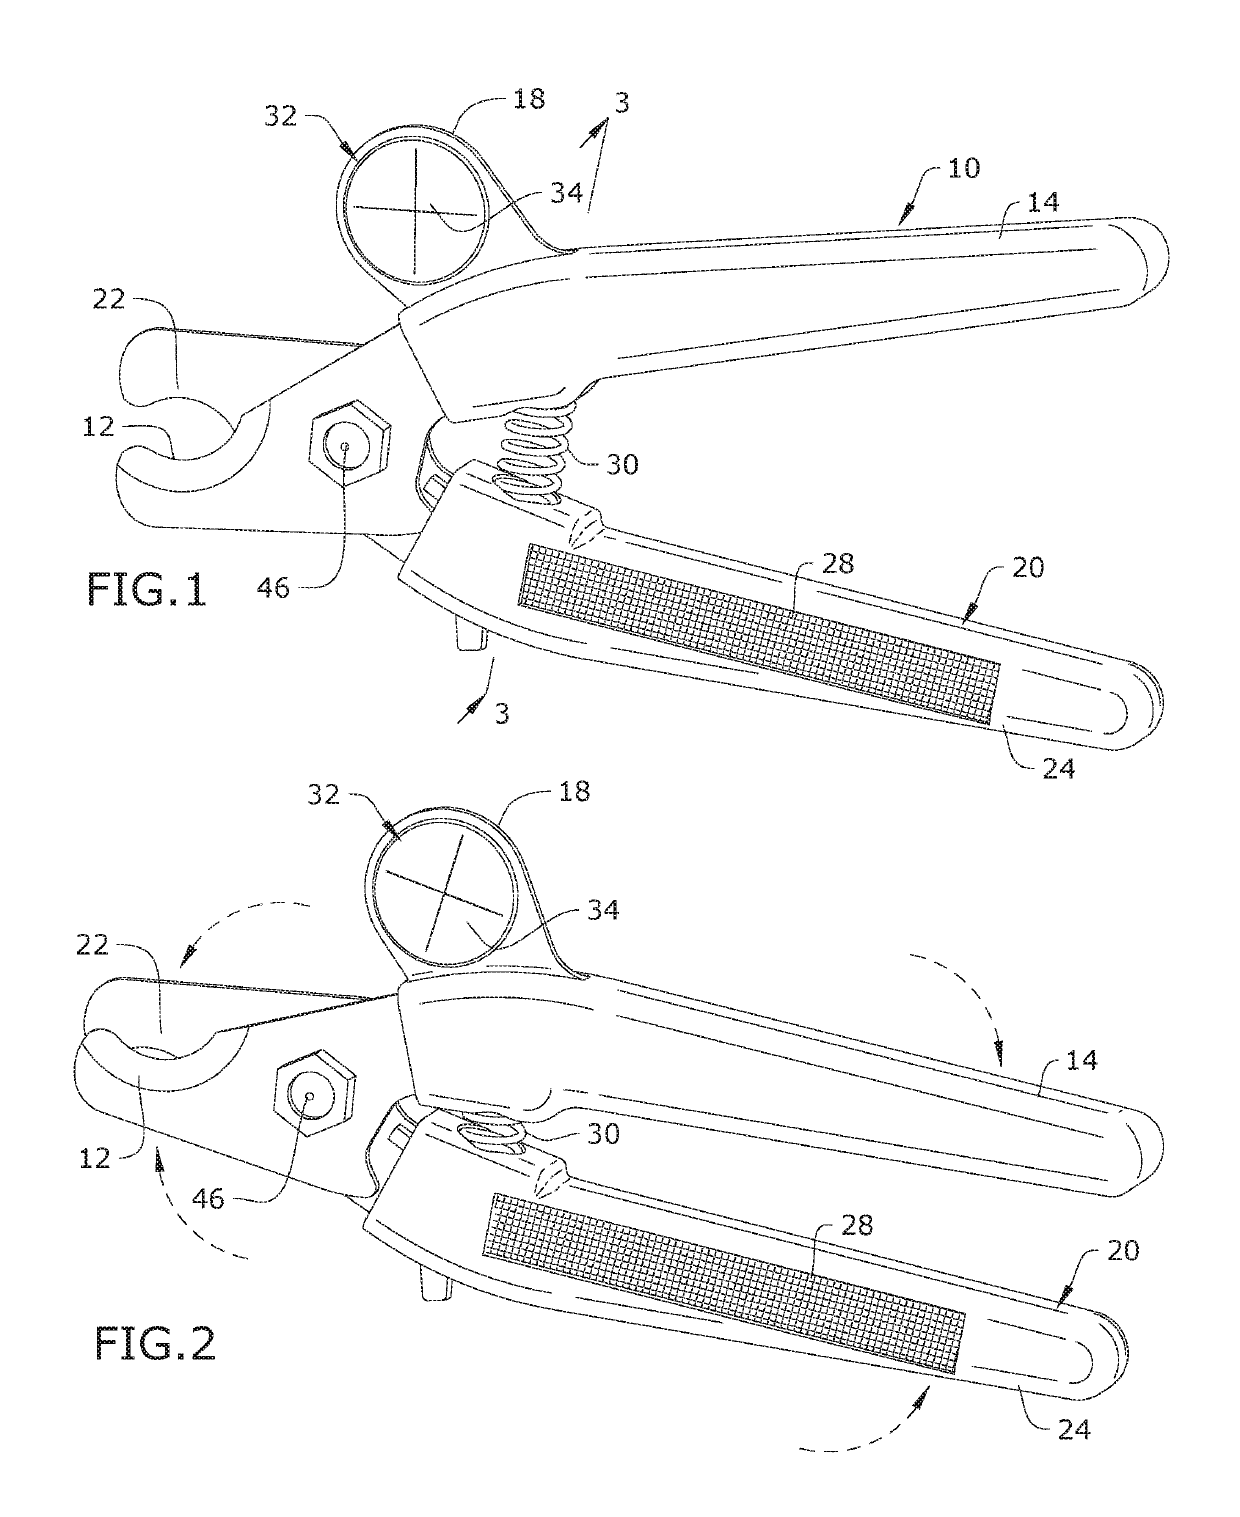 Methods of constructing pet nail clippers